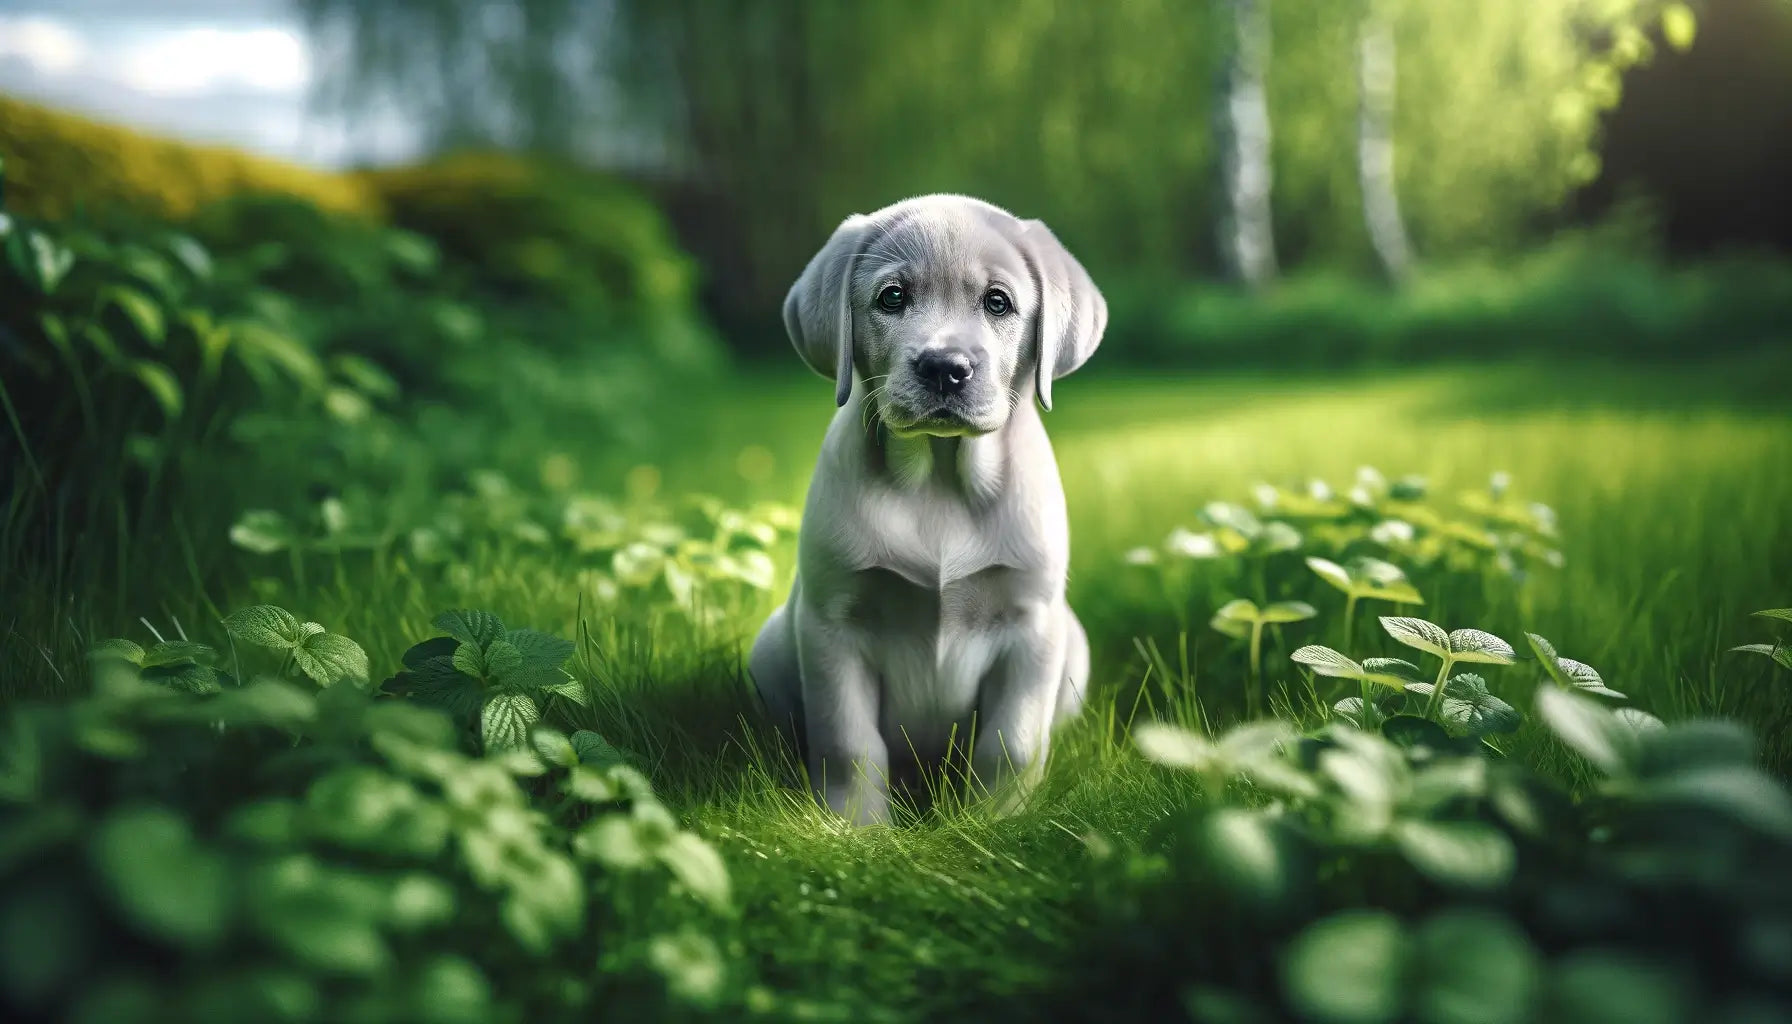 A Silver Lab sits in the grass, its miniature stature emphasized by the lush greenery around it.